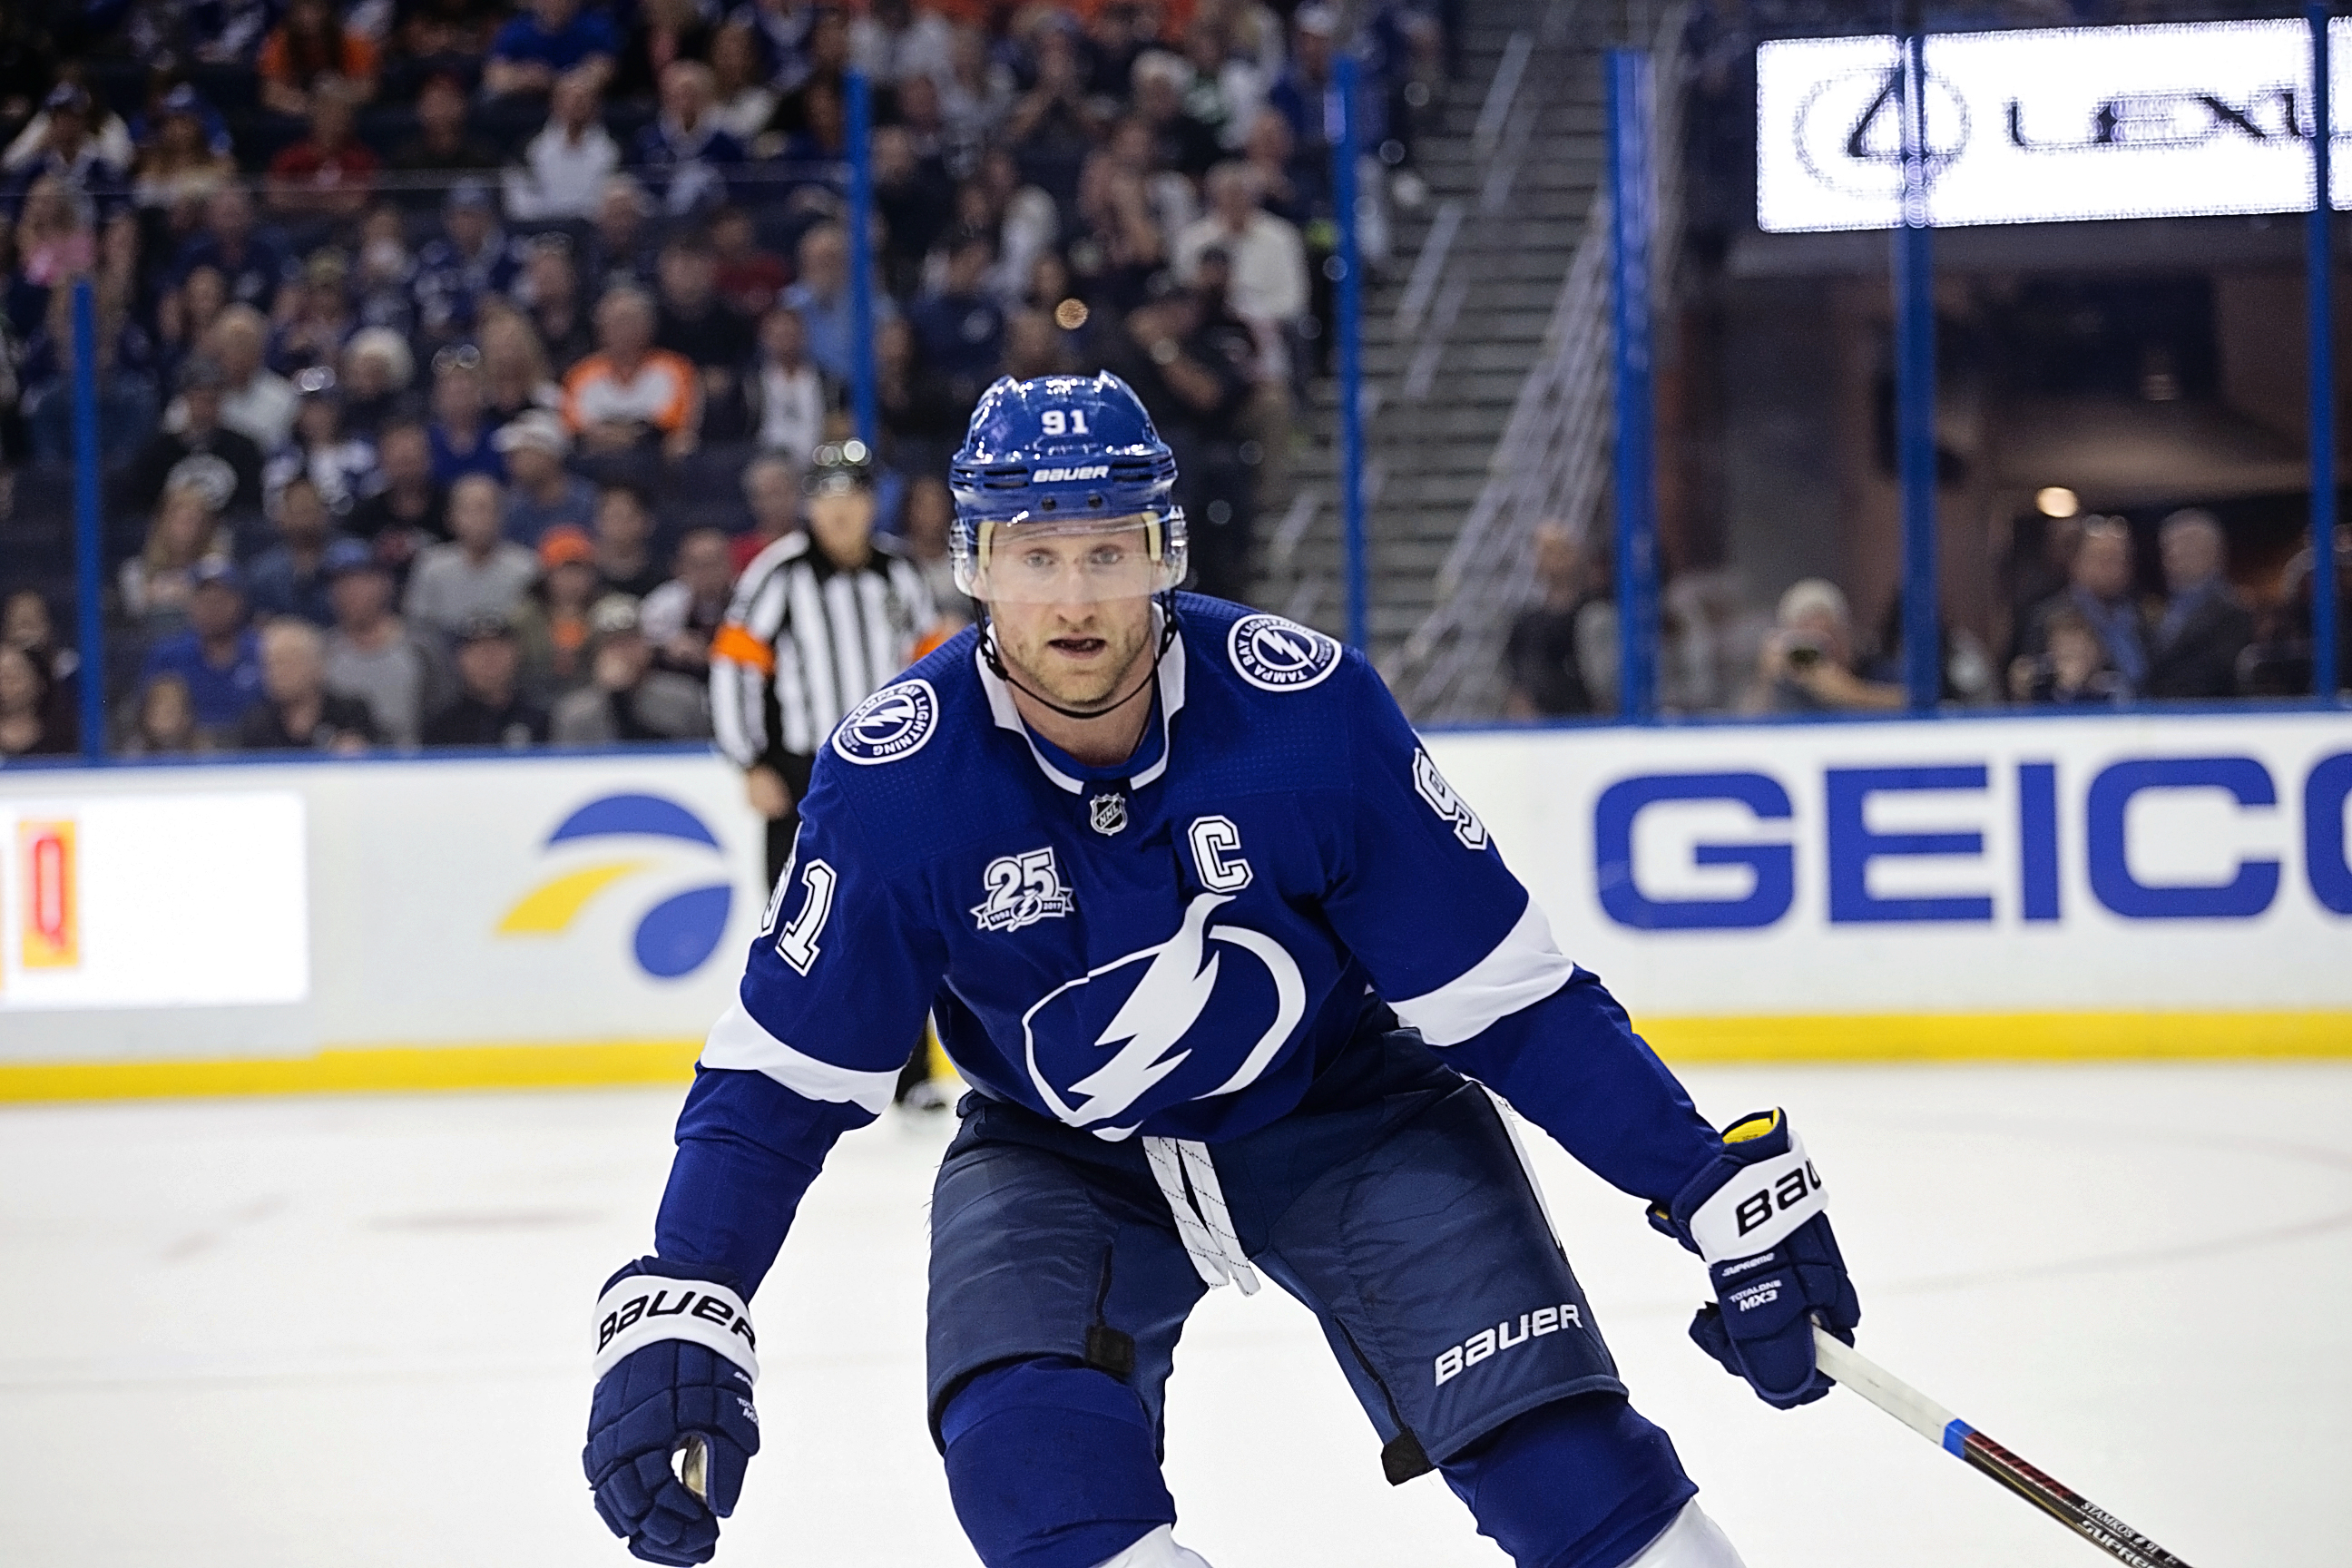 Stamkos had a five-point nigh to lead the Bolts./CARMEN MANDATO